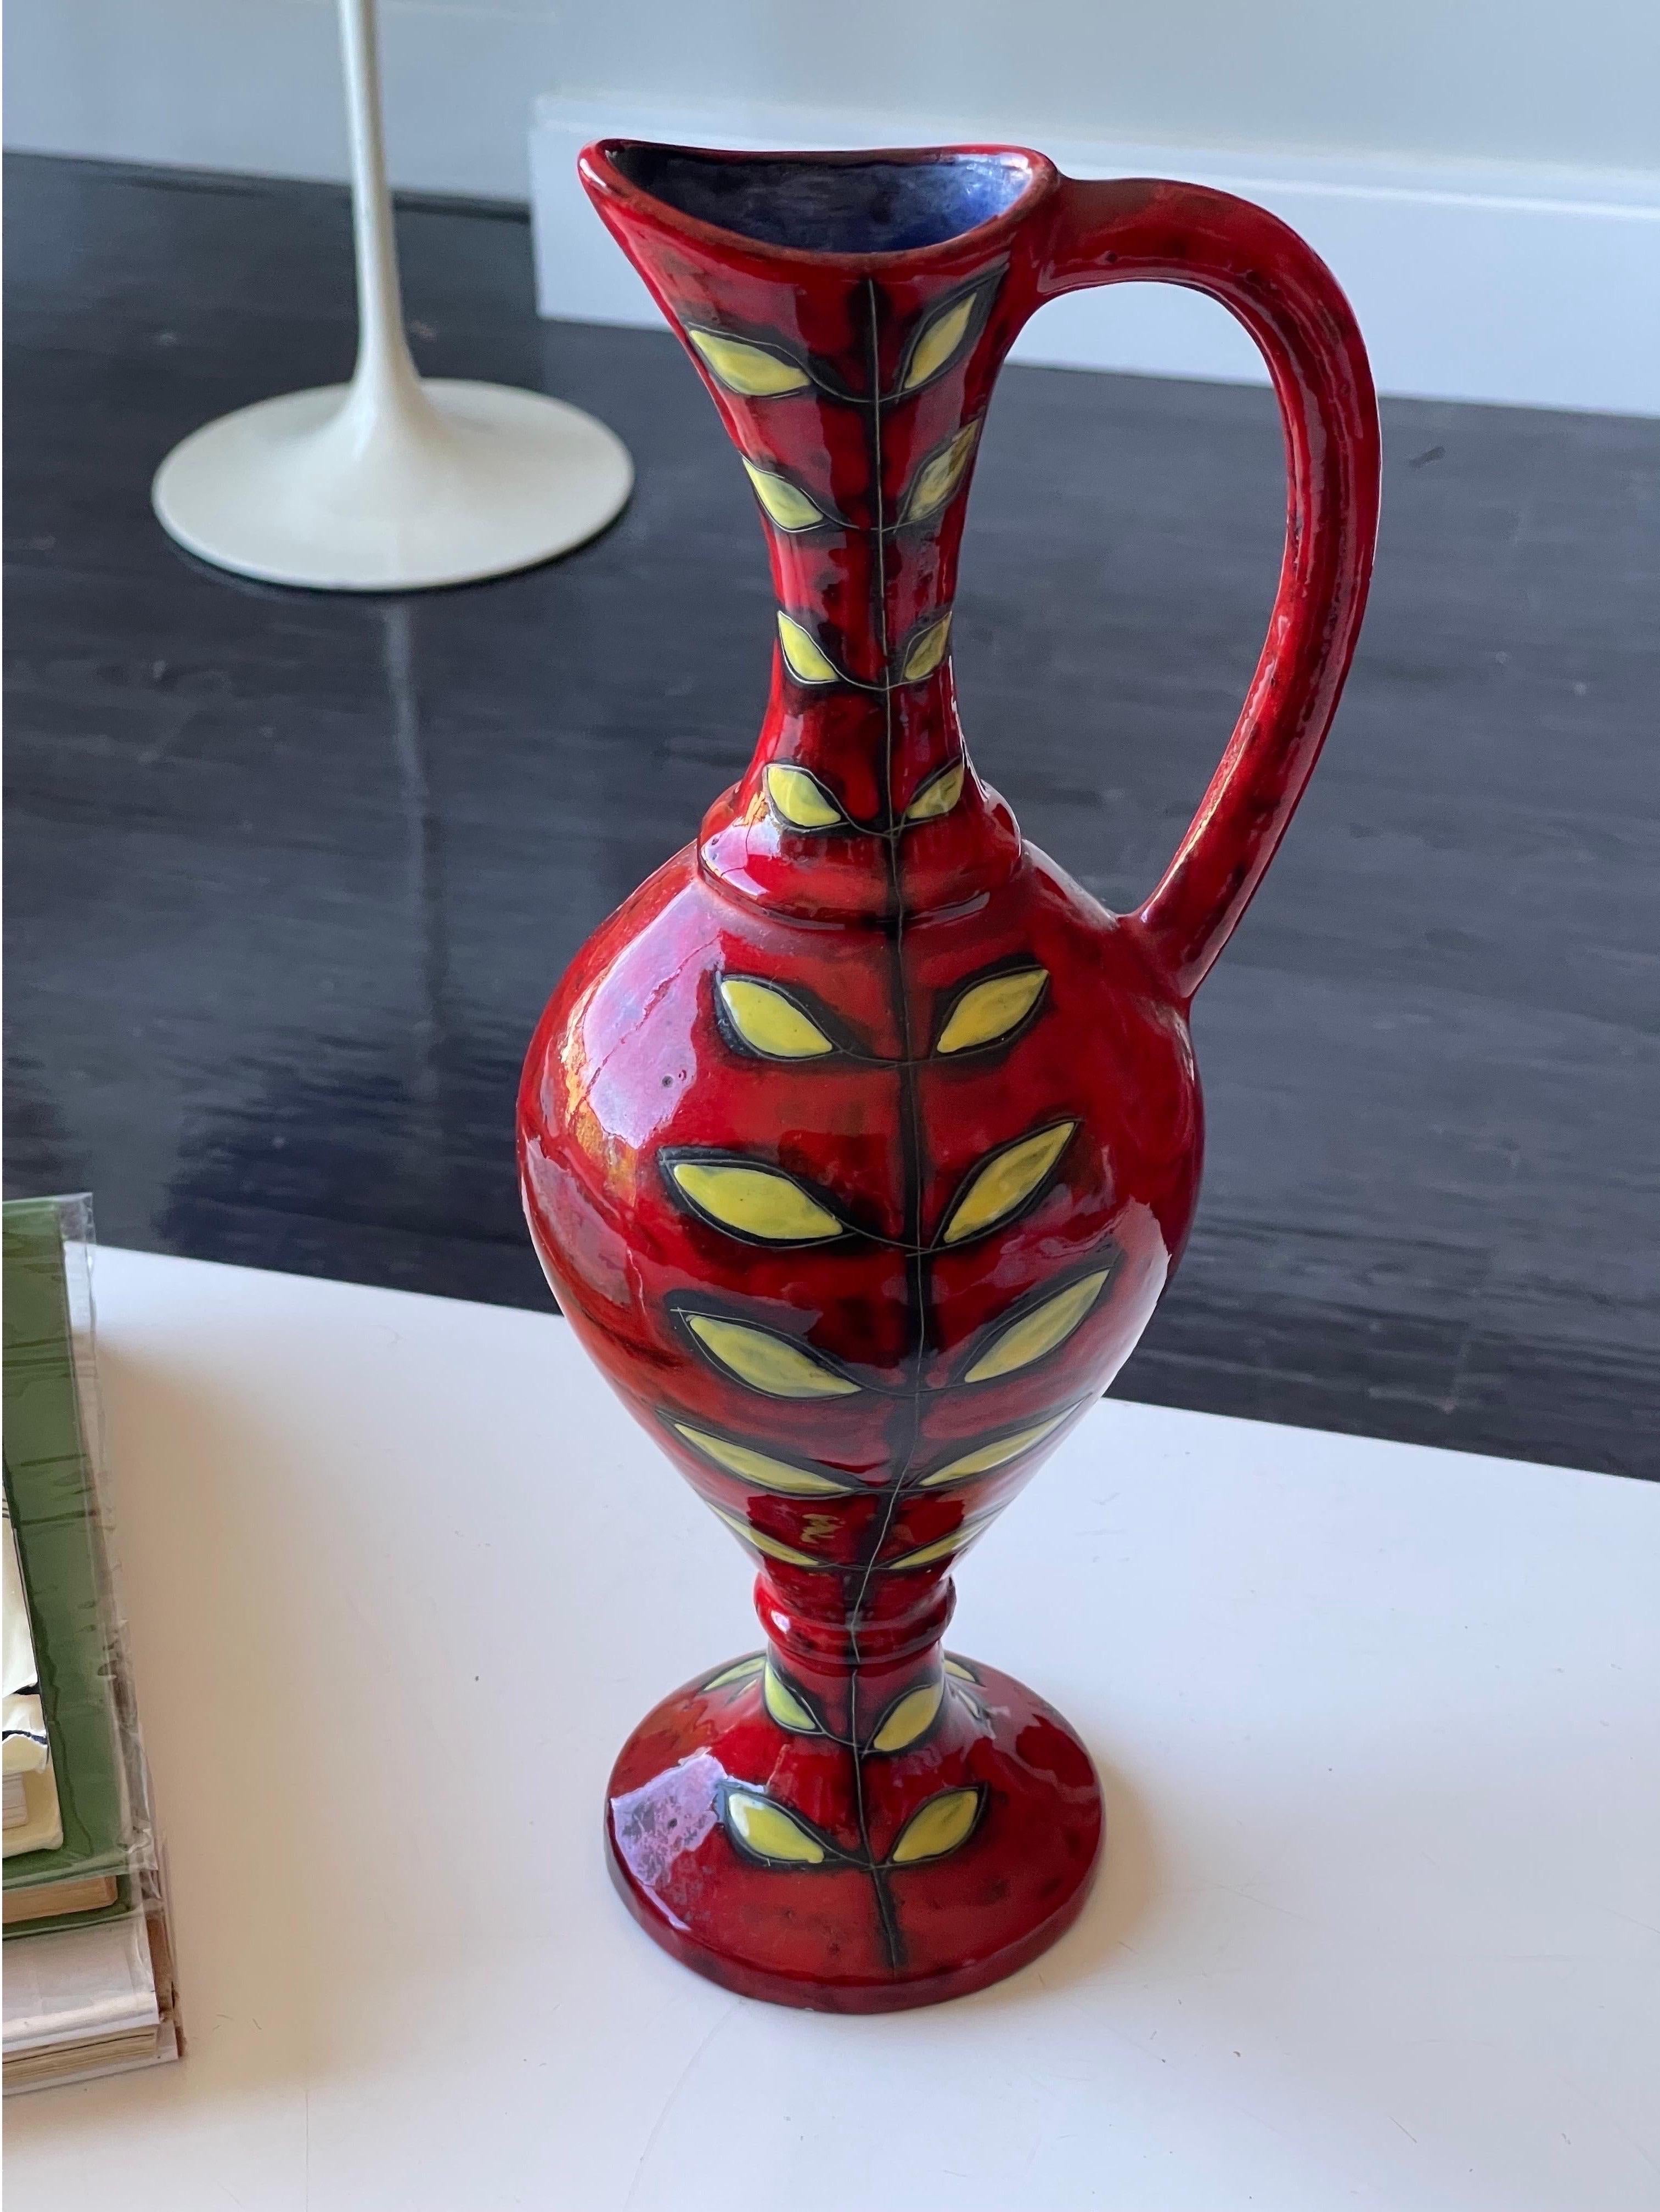 Exquisite Italian Ceramic Vase or Pitcher by Fantoni for Raymor For Sale 2